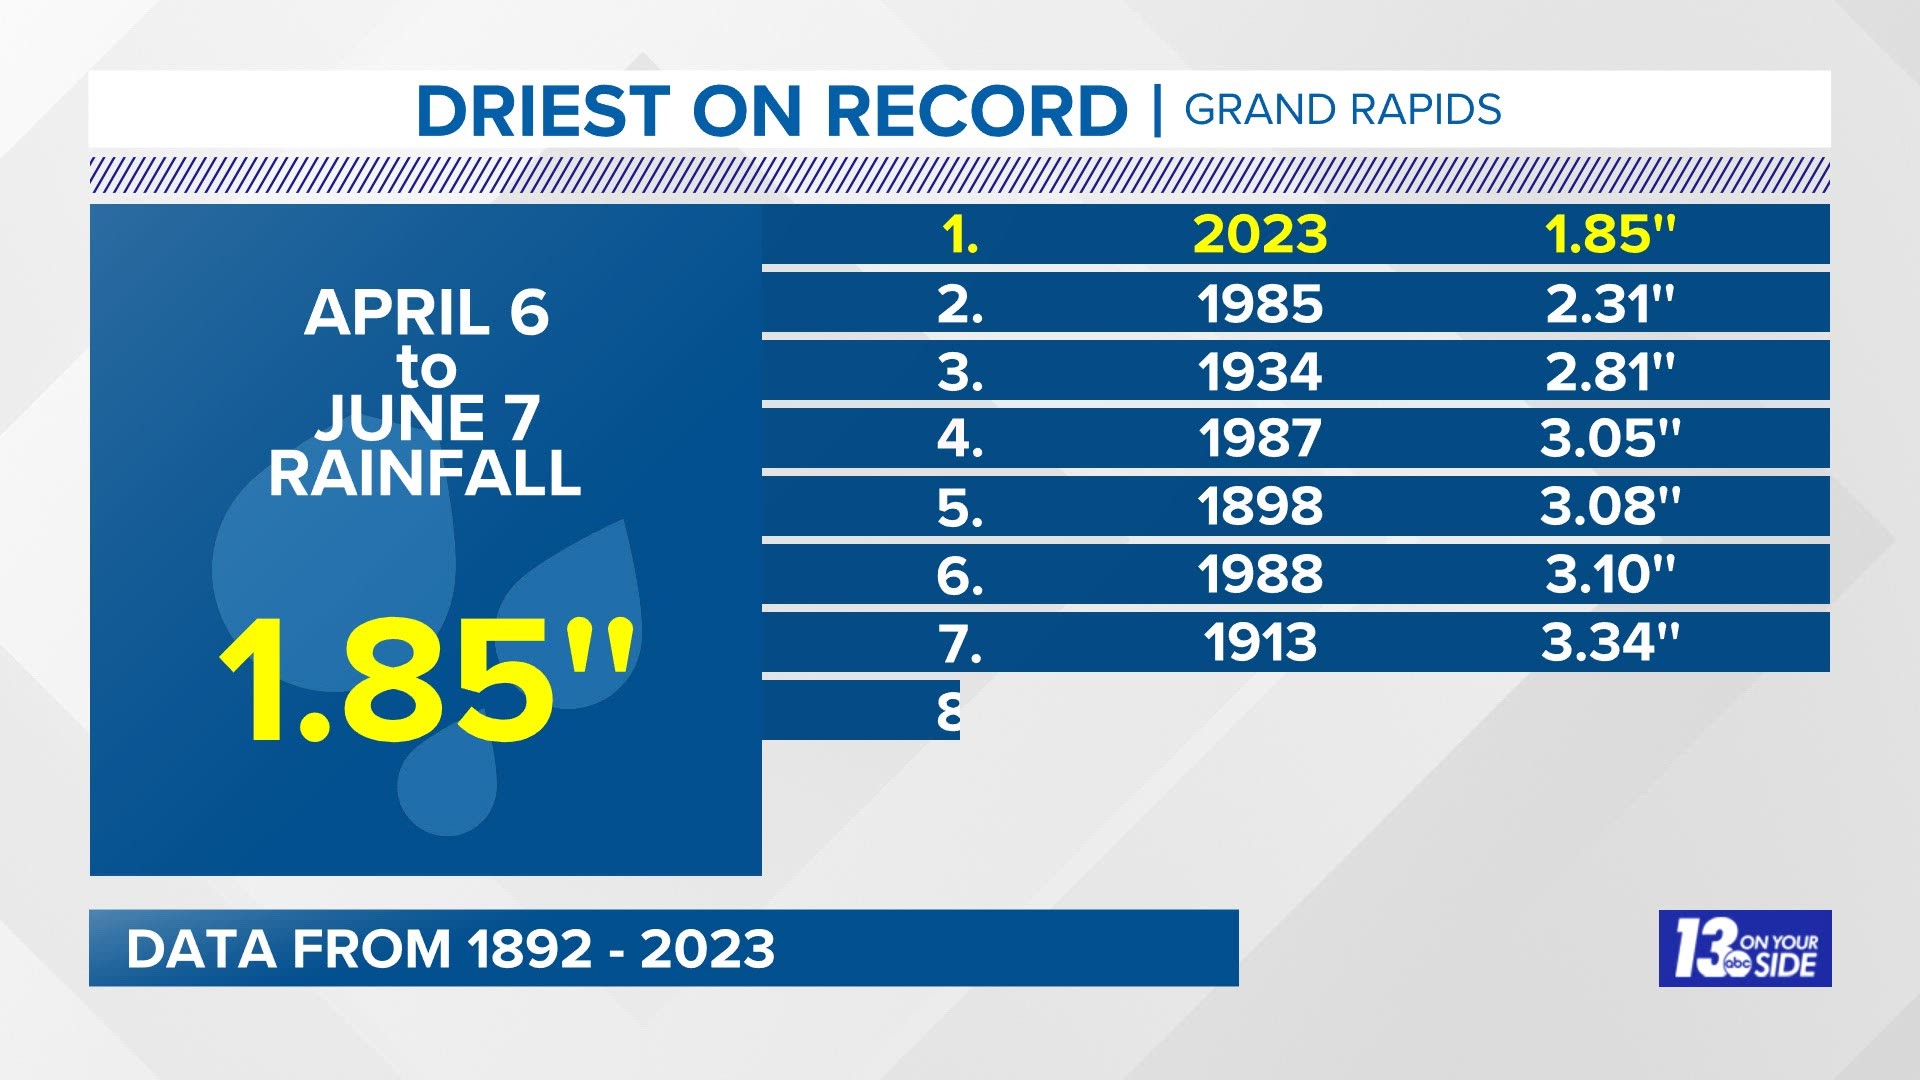 Since April 6 Grand Rapids has been the driest on record.